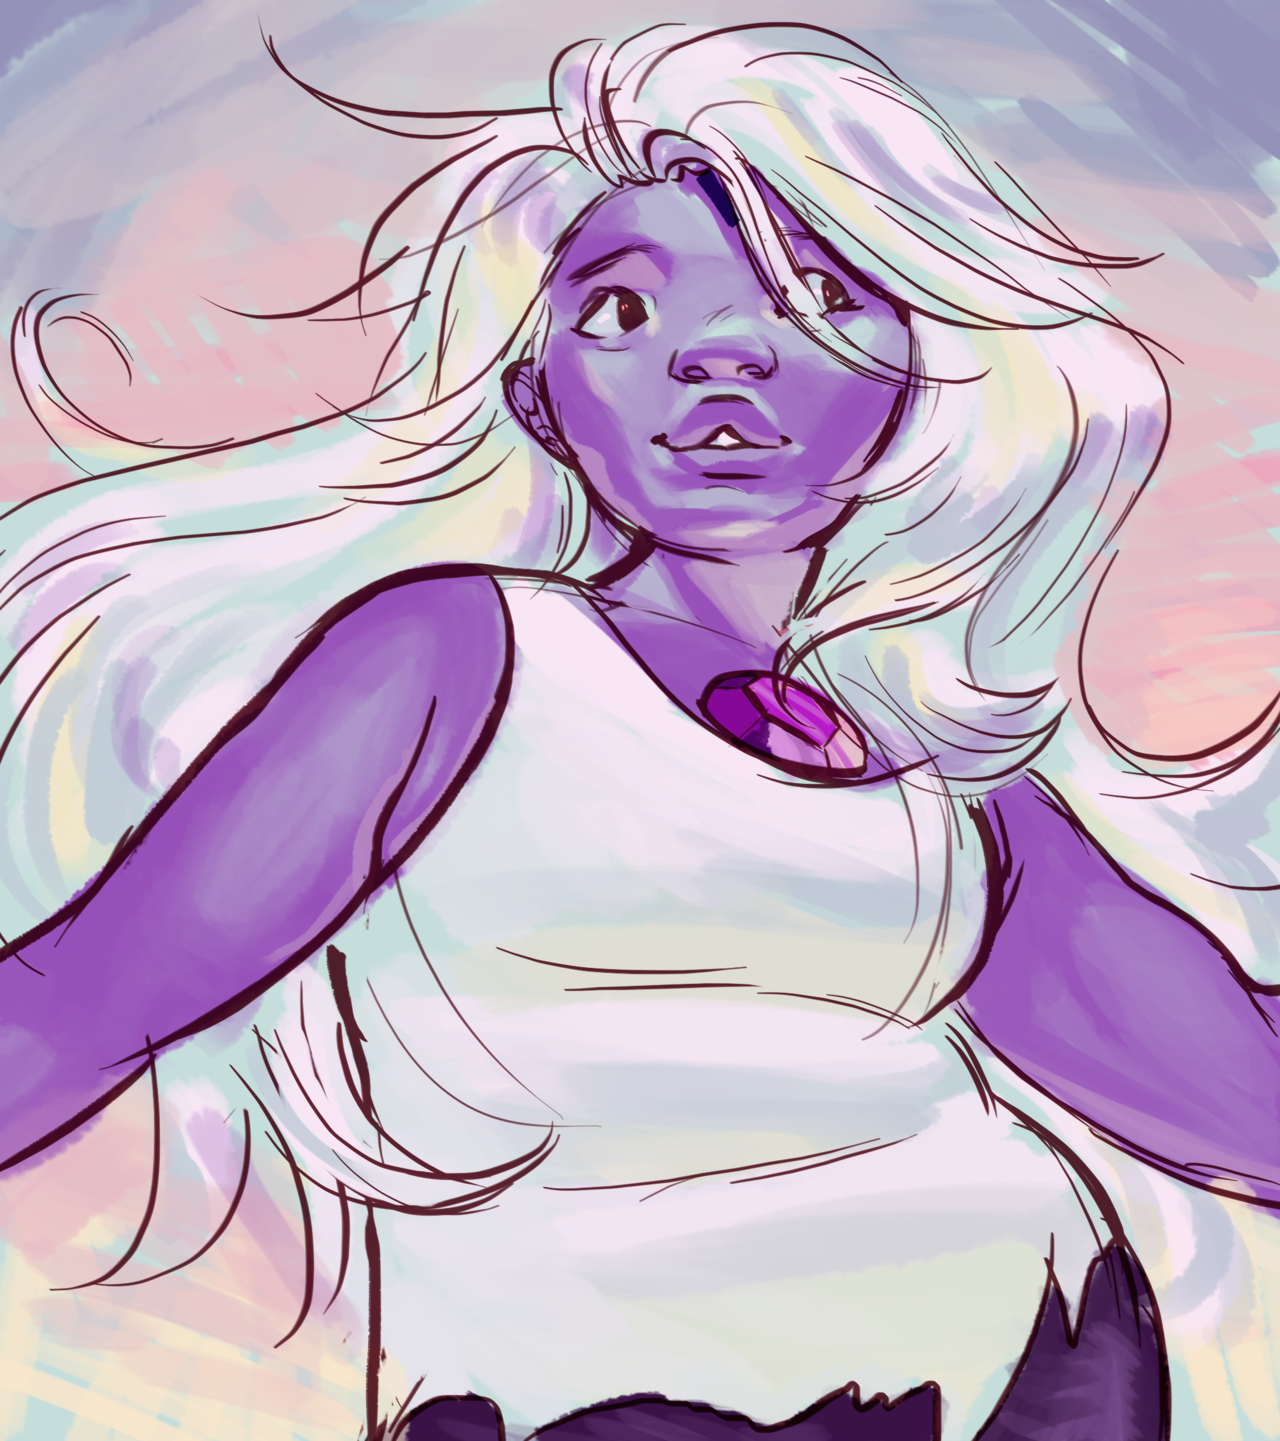 heyy Amethyst is,, a really Good character,